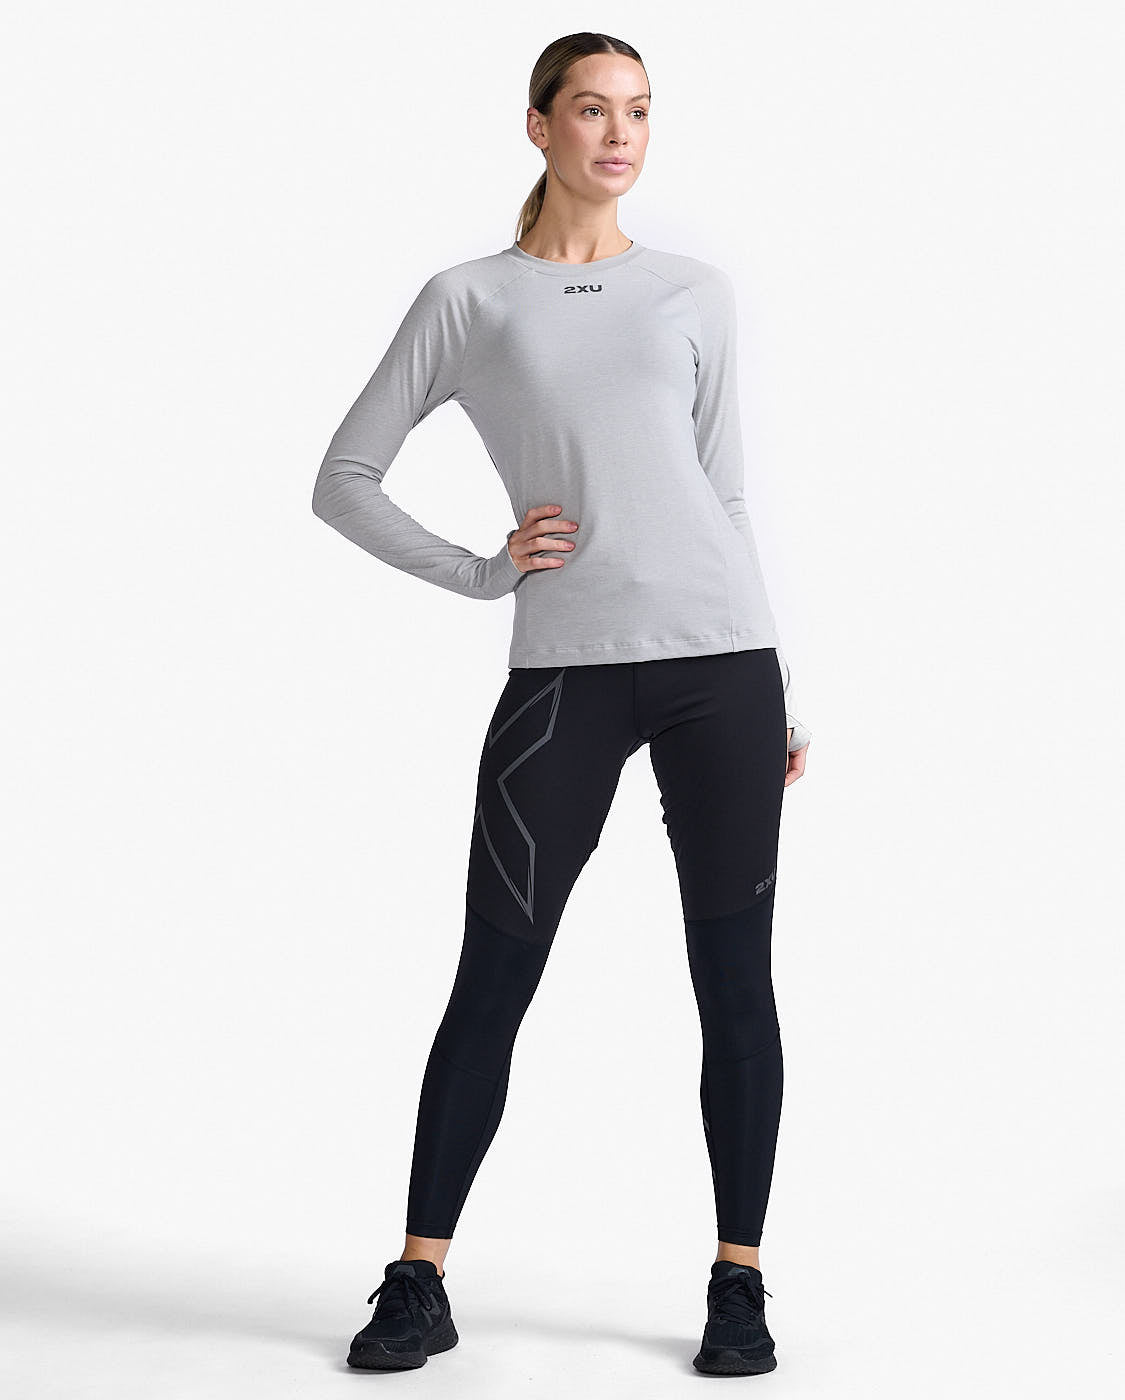 Ignition base layer L/S - grey marle - Tops